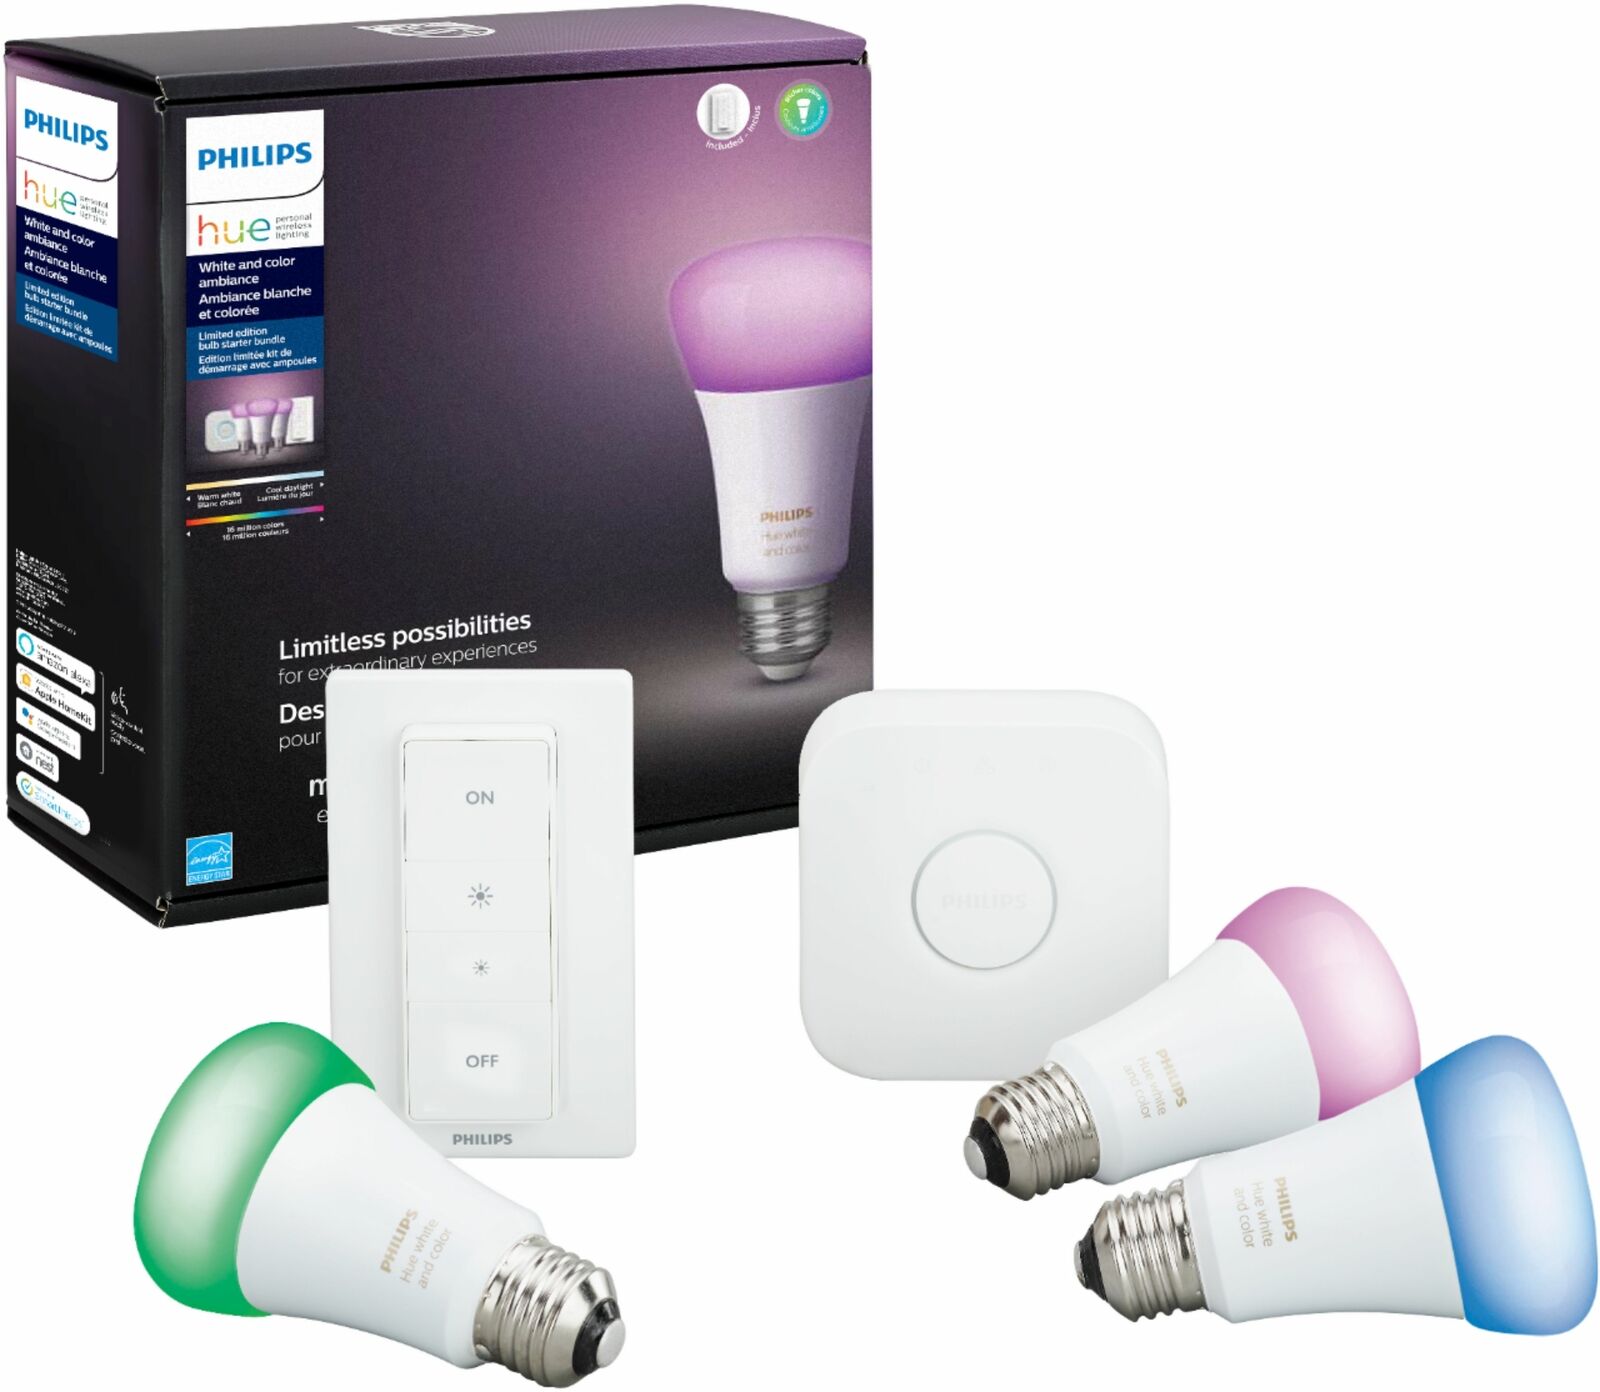 Philips - Hue White & Color Ambiance A19 Led Starter Kit - Multicolor